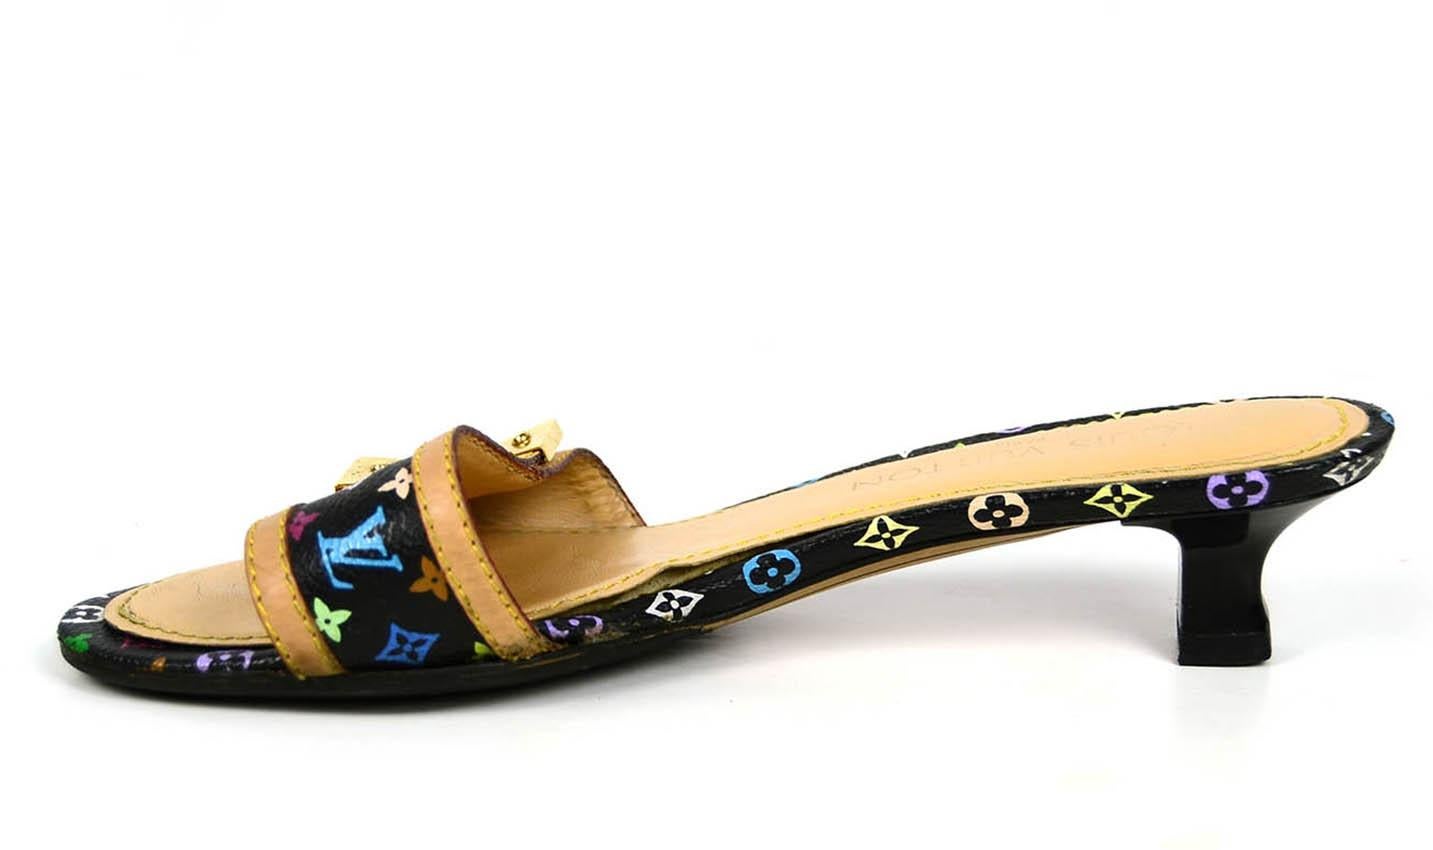 Louis Vuitton Black Monogram Multicolore Open-Toe Mules sz 37.5

Made In: Italy
Color: Black with multicolor monogram
Hardware: Goldtone
Materials: Coated canvas and vachetta leather
Closure/Opening: Slide on
Overall Condition: Excellent pre-owned